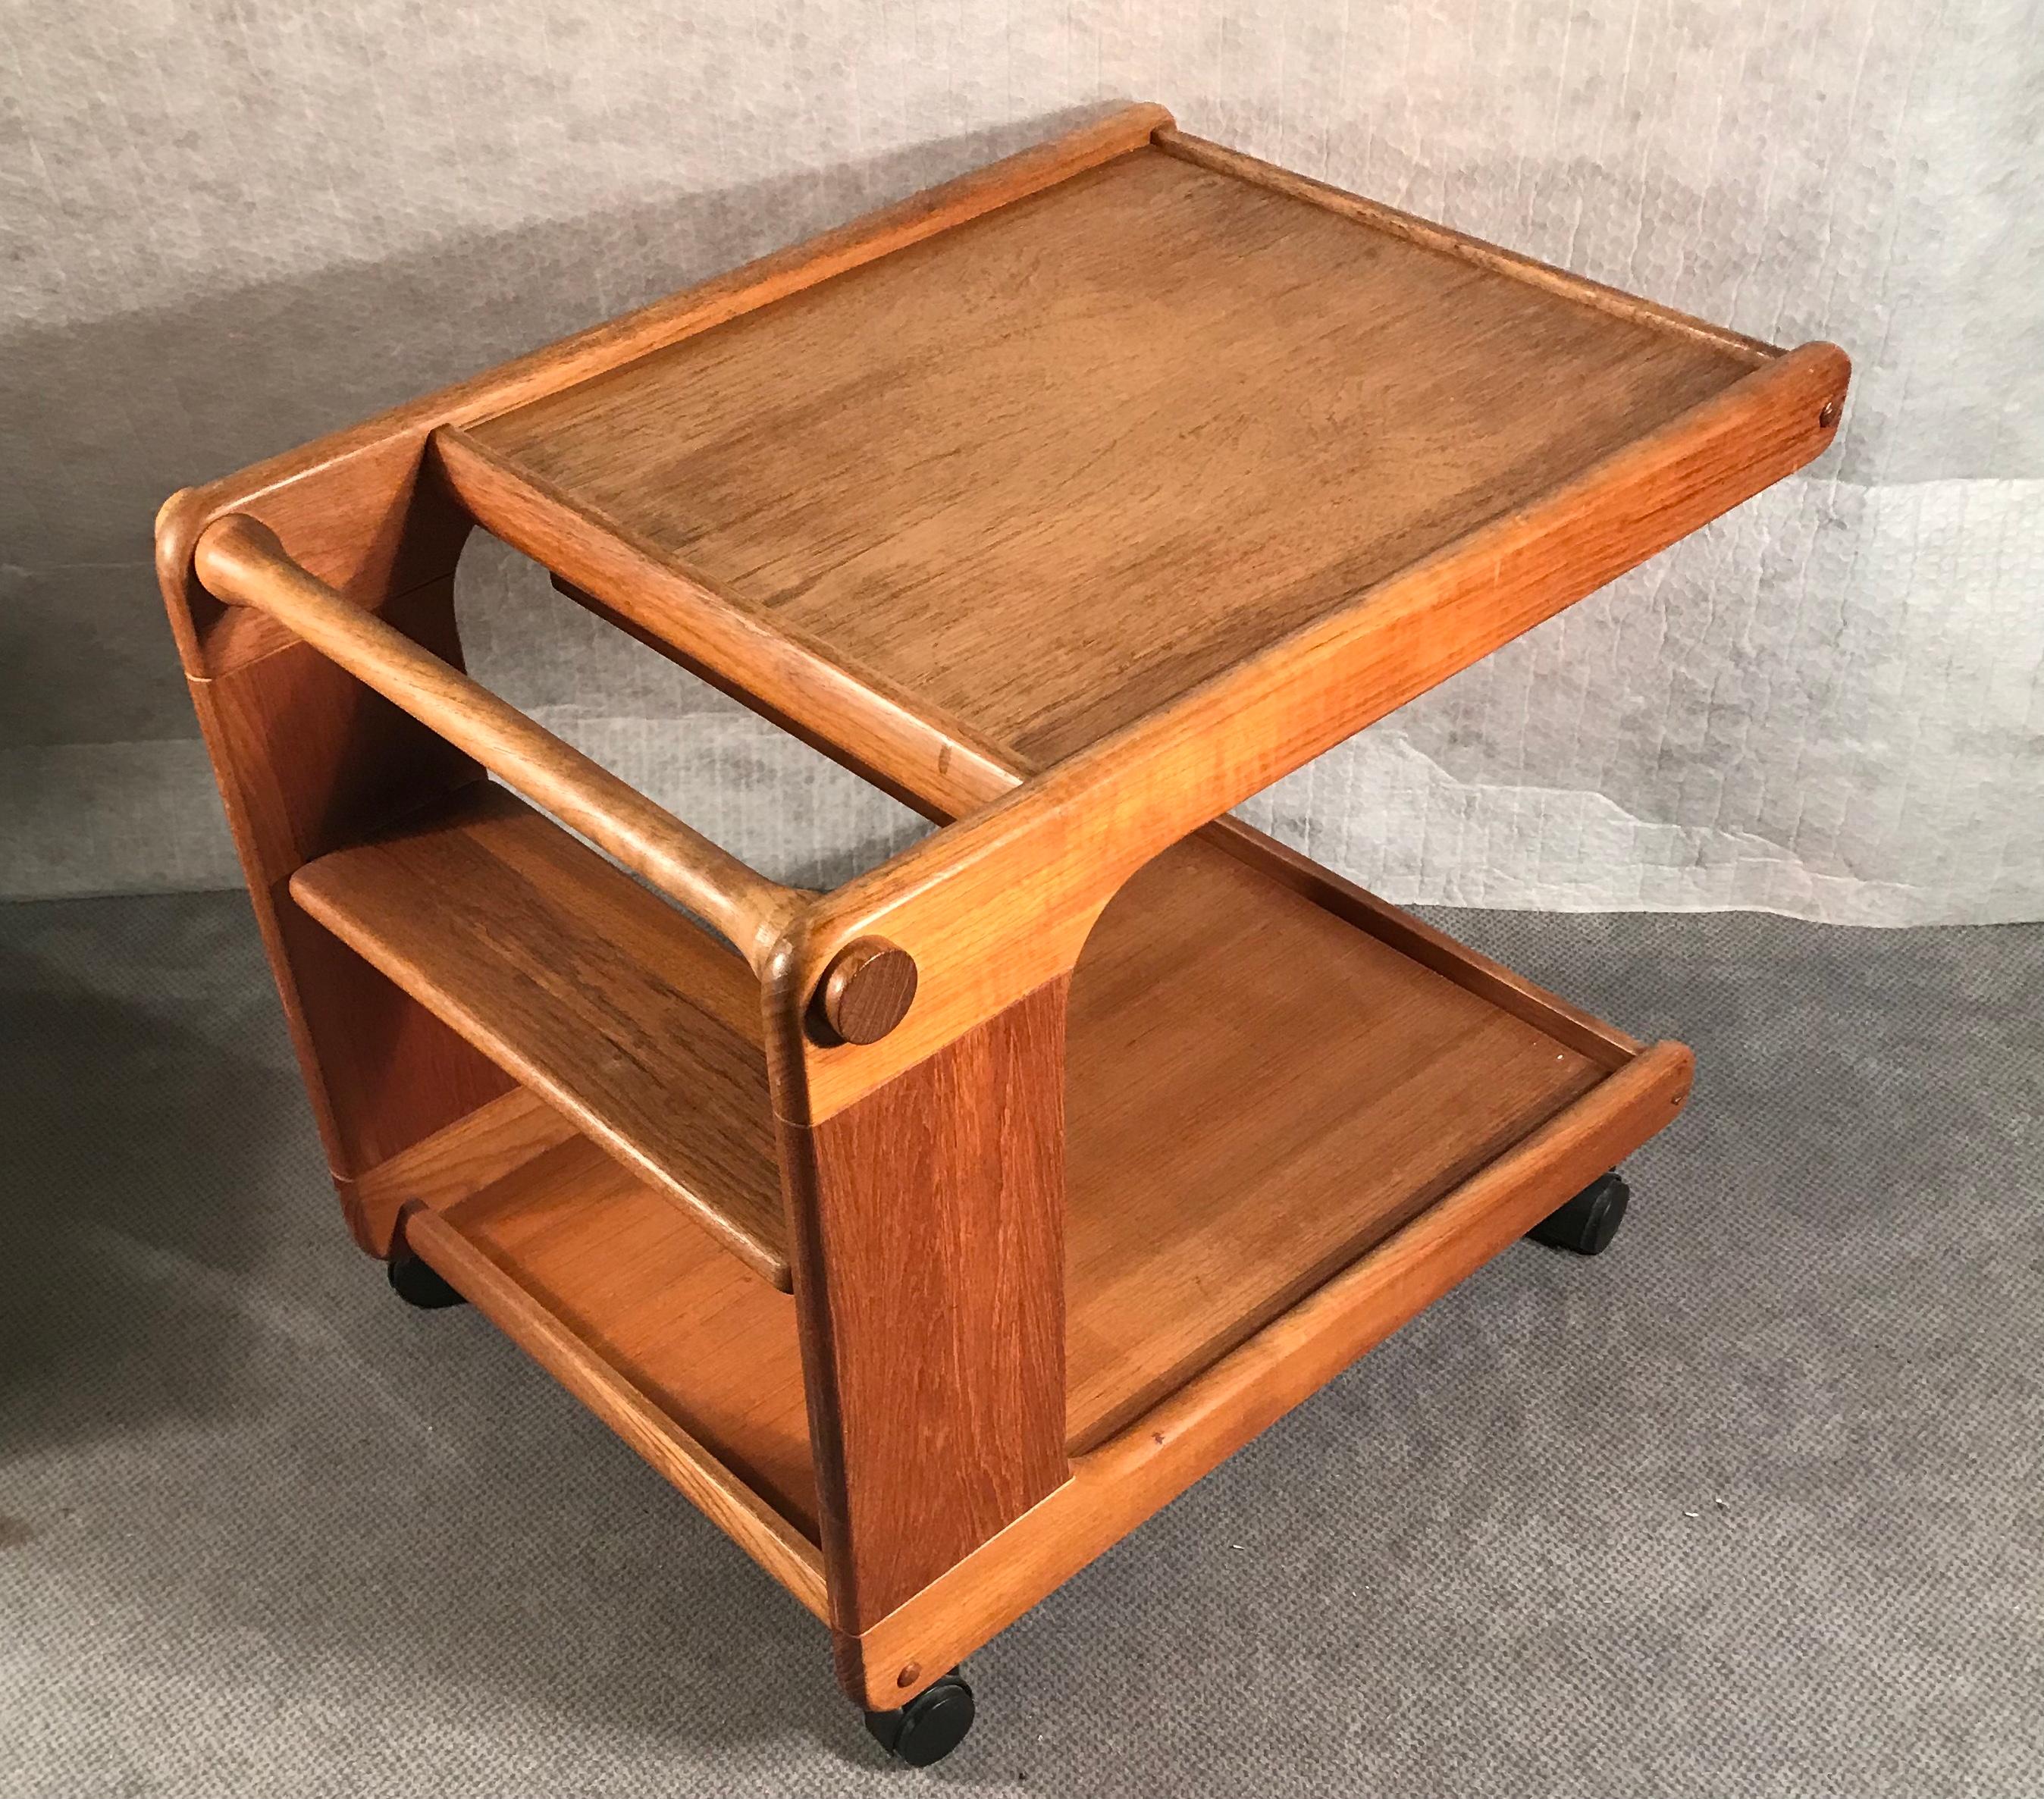 Mid Century tea or bar cart, Denmark, 1960's. Teak wood.
The bar cart stands on four black casters. It has two shelves. the upper shelf has a pull out tray, which is removable. The bar cart is in very good vintage condition.
  